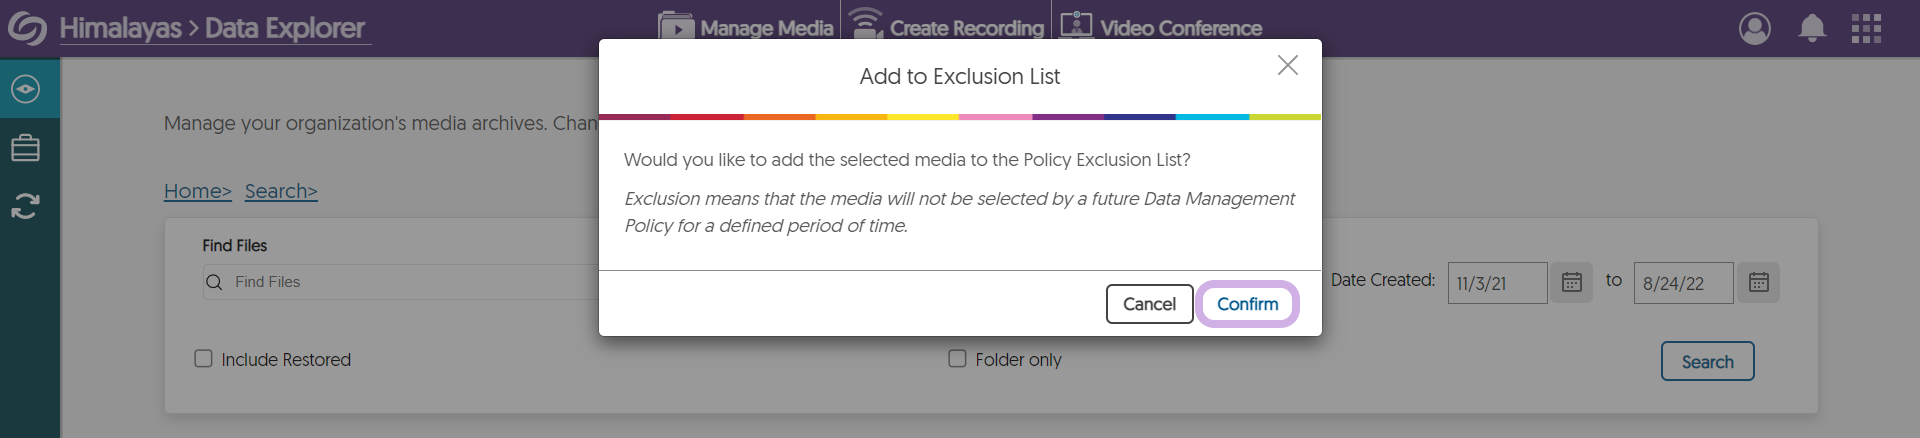 The Confirm button is highlighted in the Add to Exclusion List window.